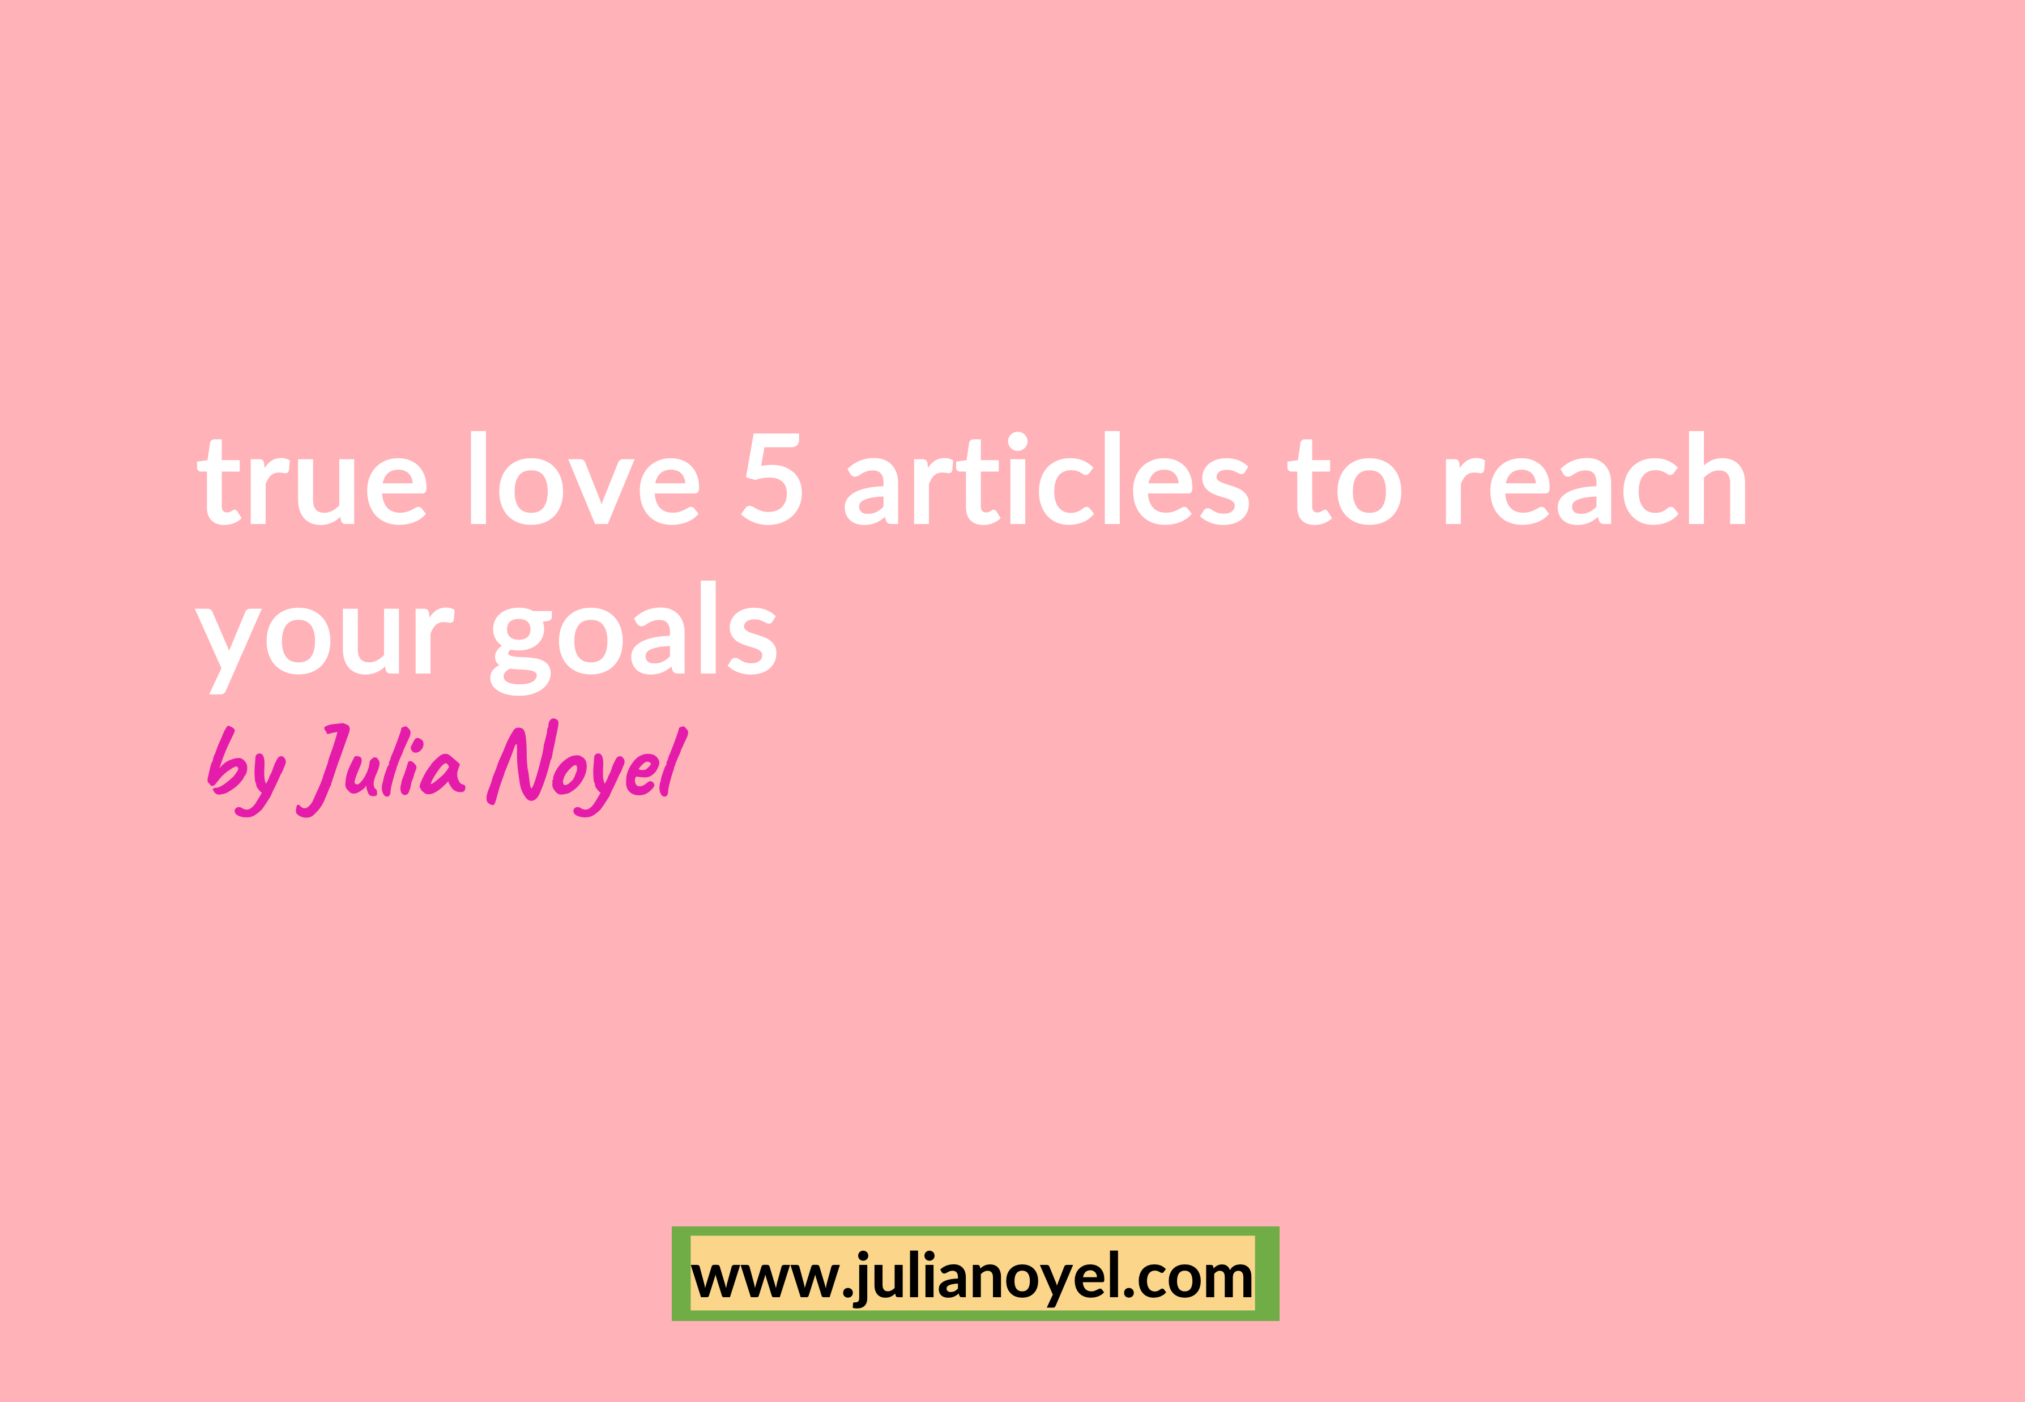 true love 5 articles to reach your goals by Julia Noyel